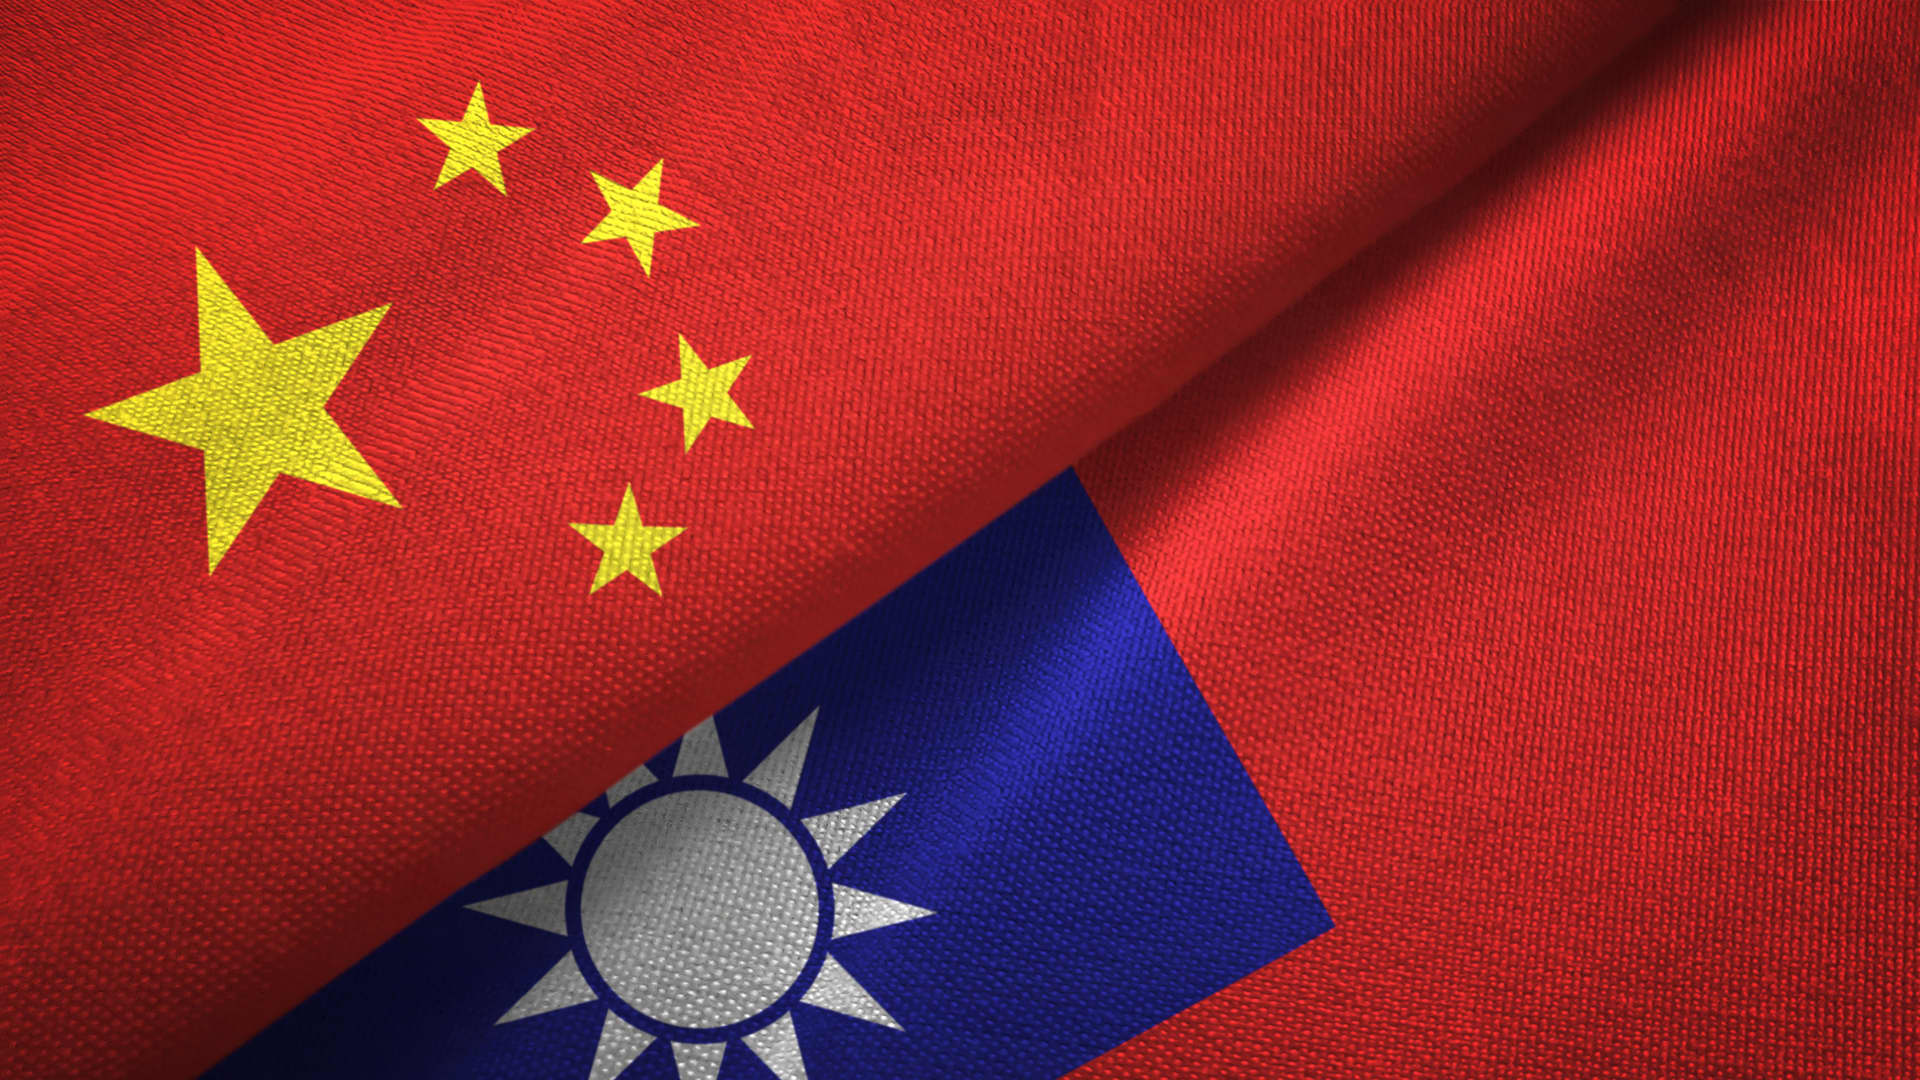 'Taiwan is China's Taiwan': Beijing says Taiwan's ruling party not representative of popular opinion